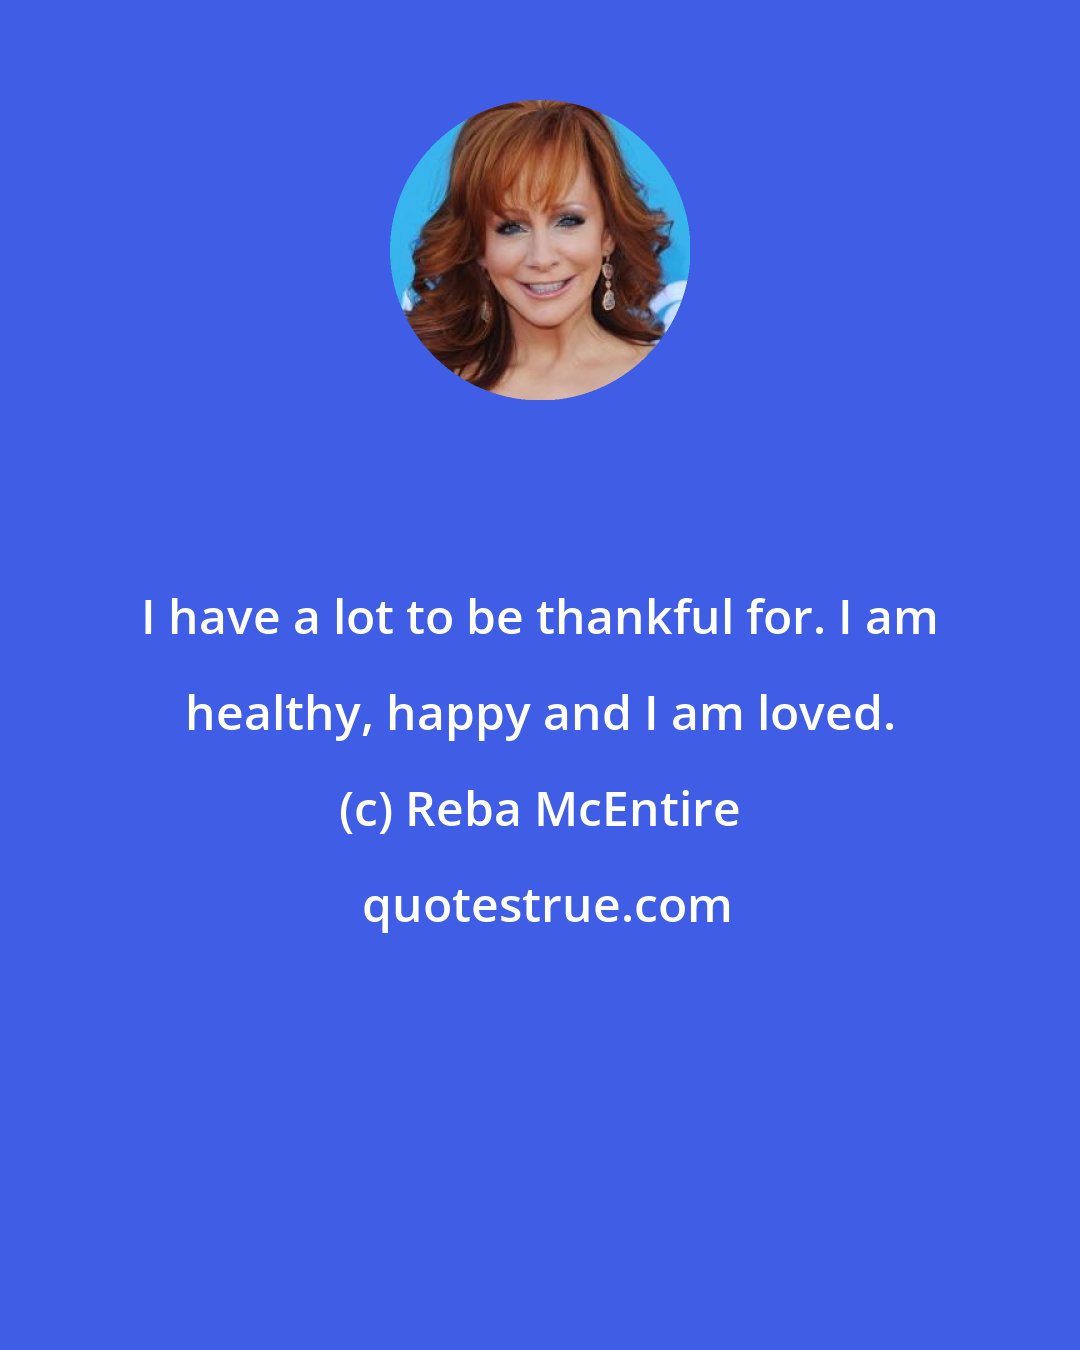 Reba McEntire: I have a lot to be thankful for. I am healthy, happy and I am loved.